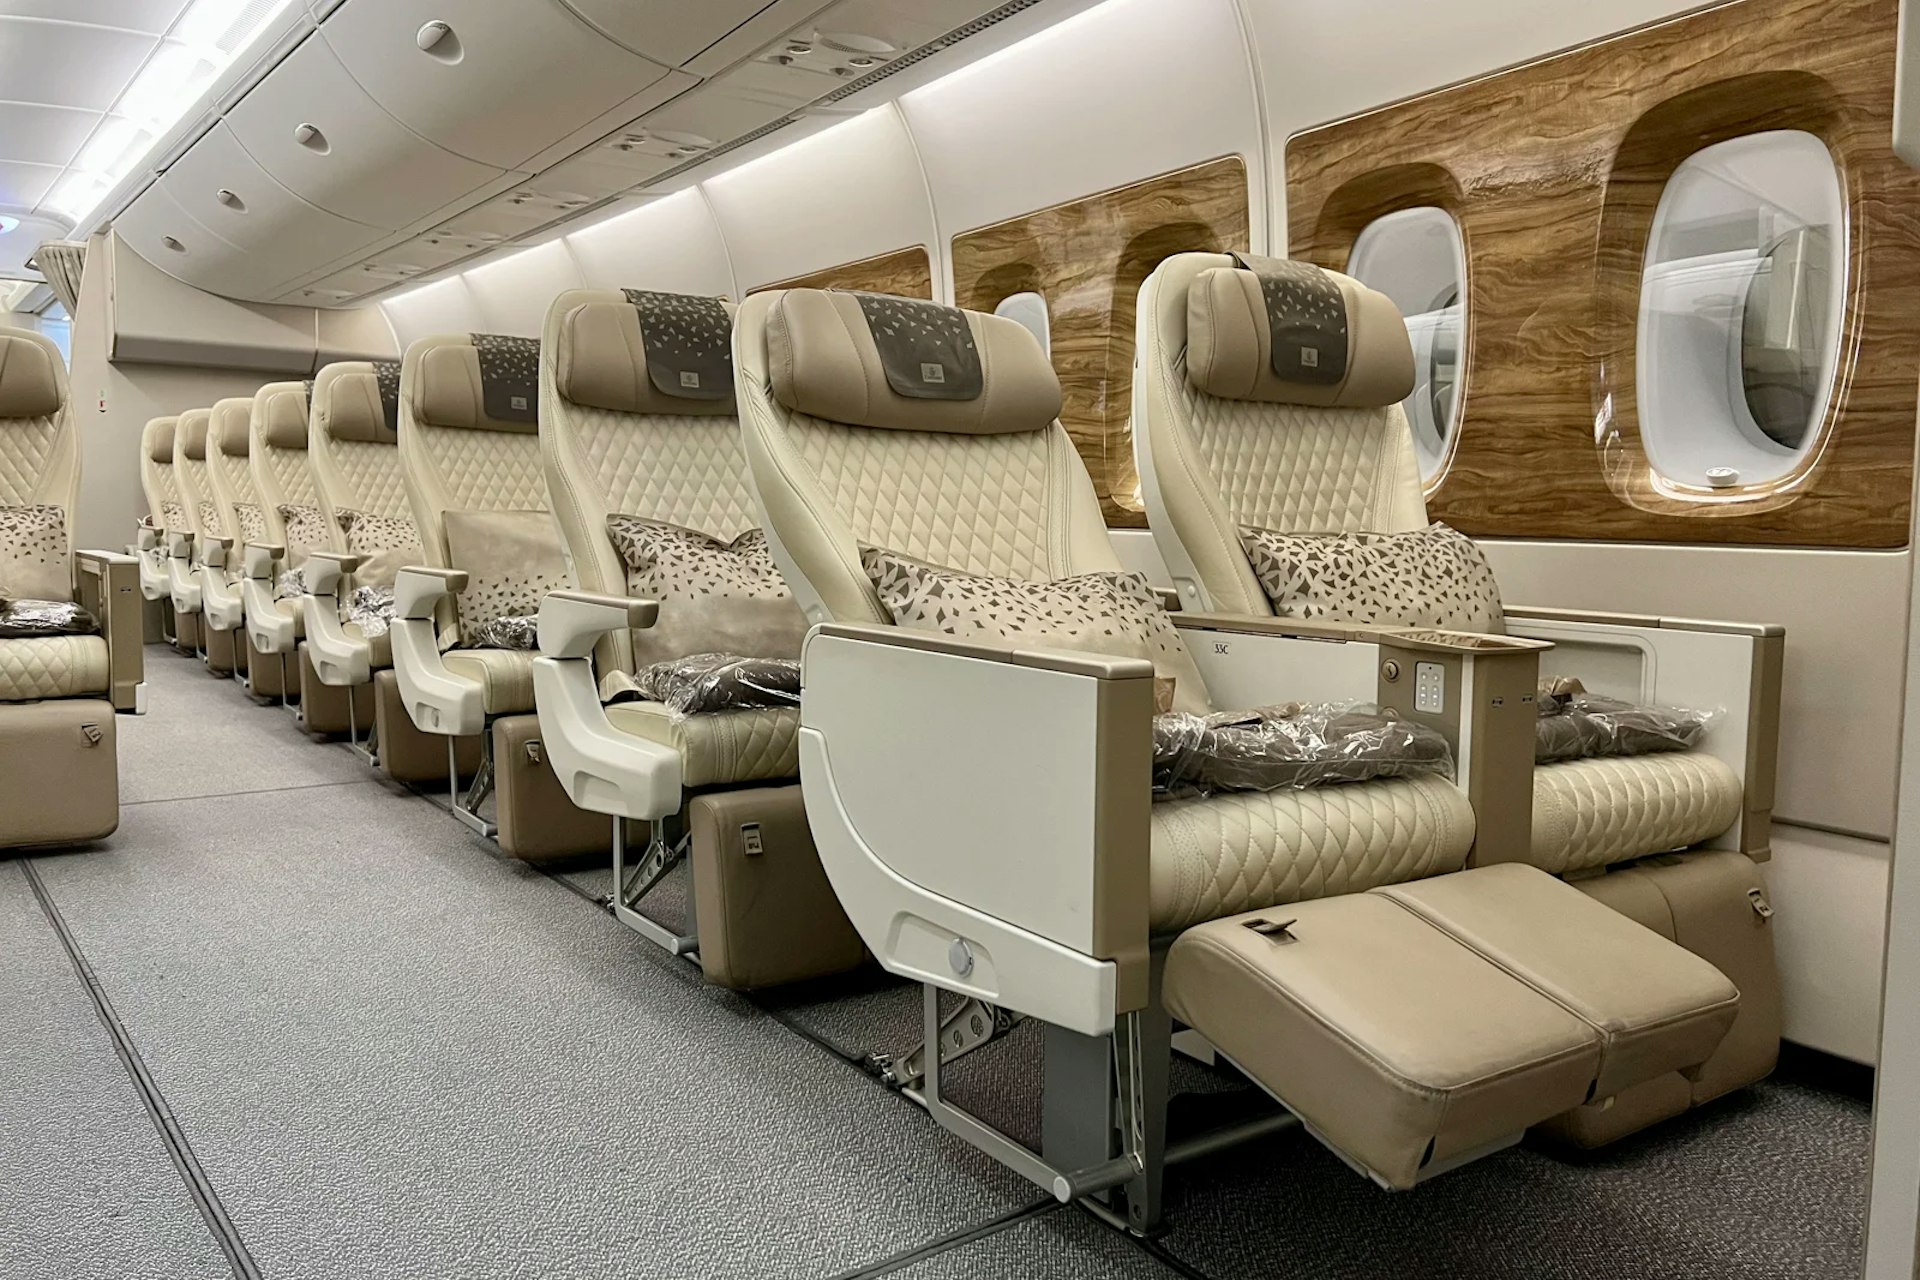 The new premium economy class found on select Emirates Airlines flights